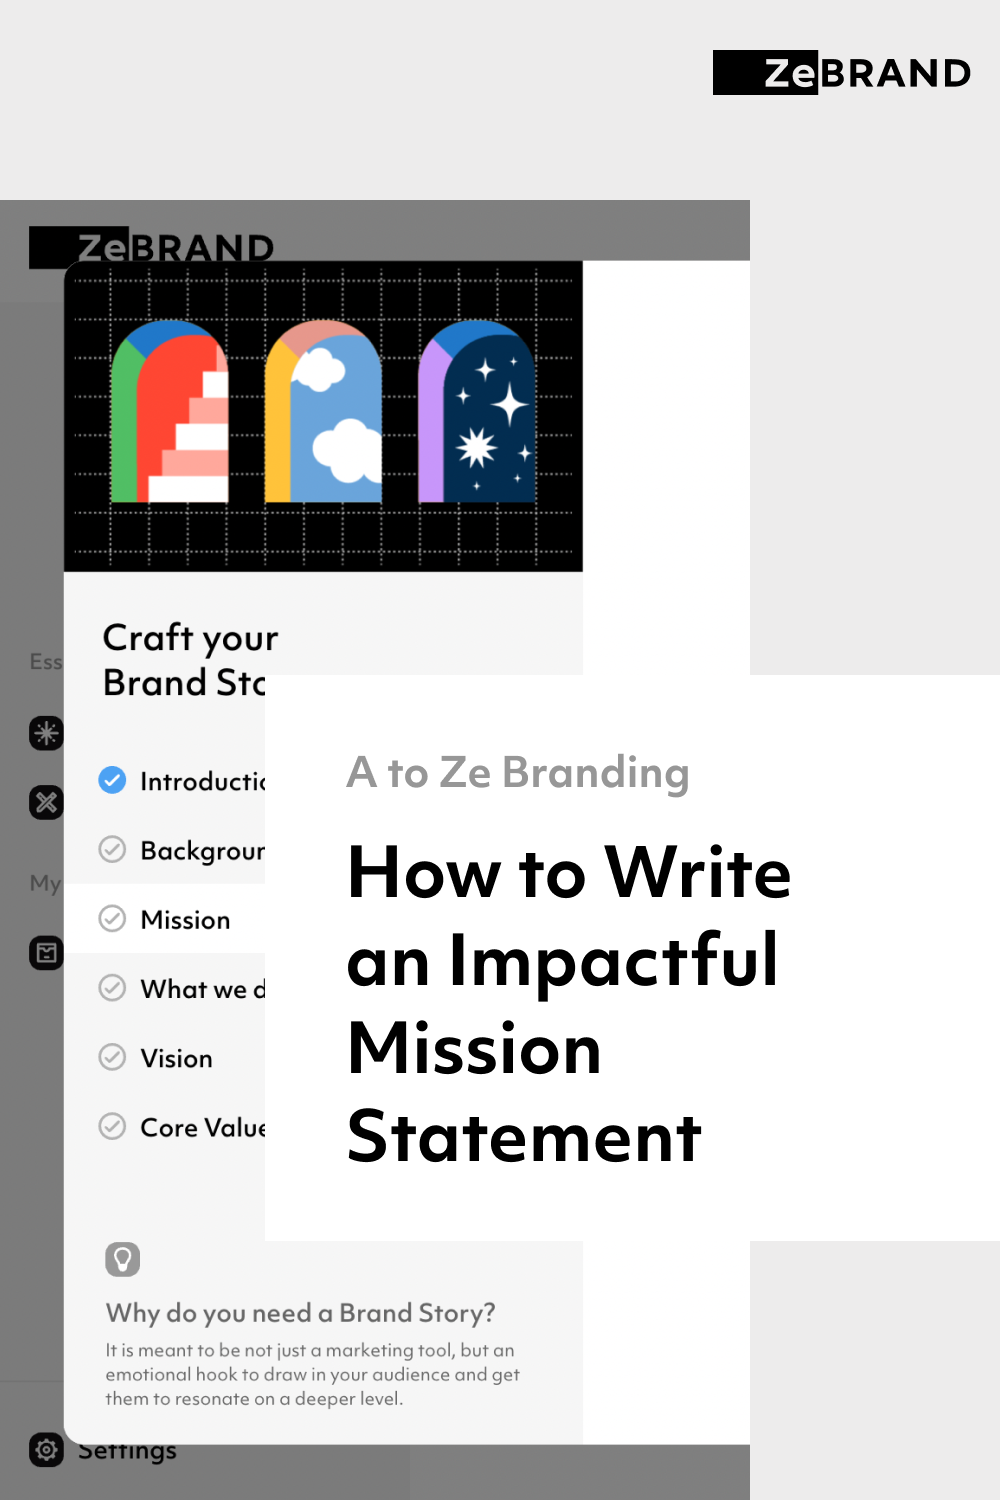 How to Write an Impactful Brand Mission Statement